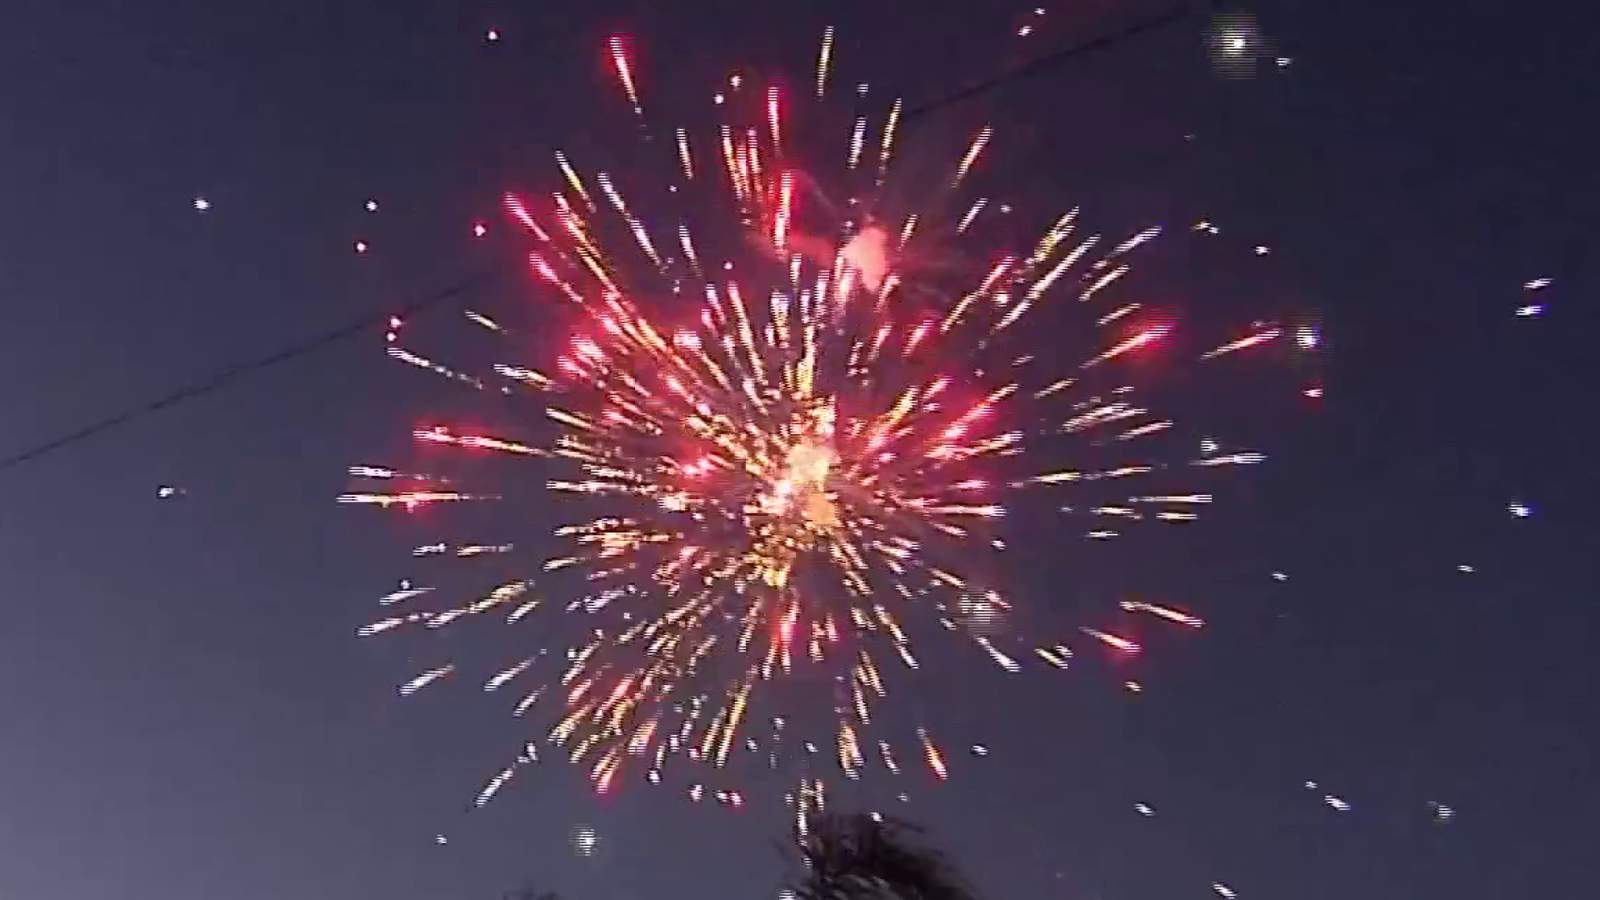 America is running out of fireworks, industry leaders say